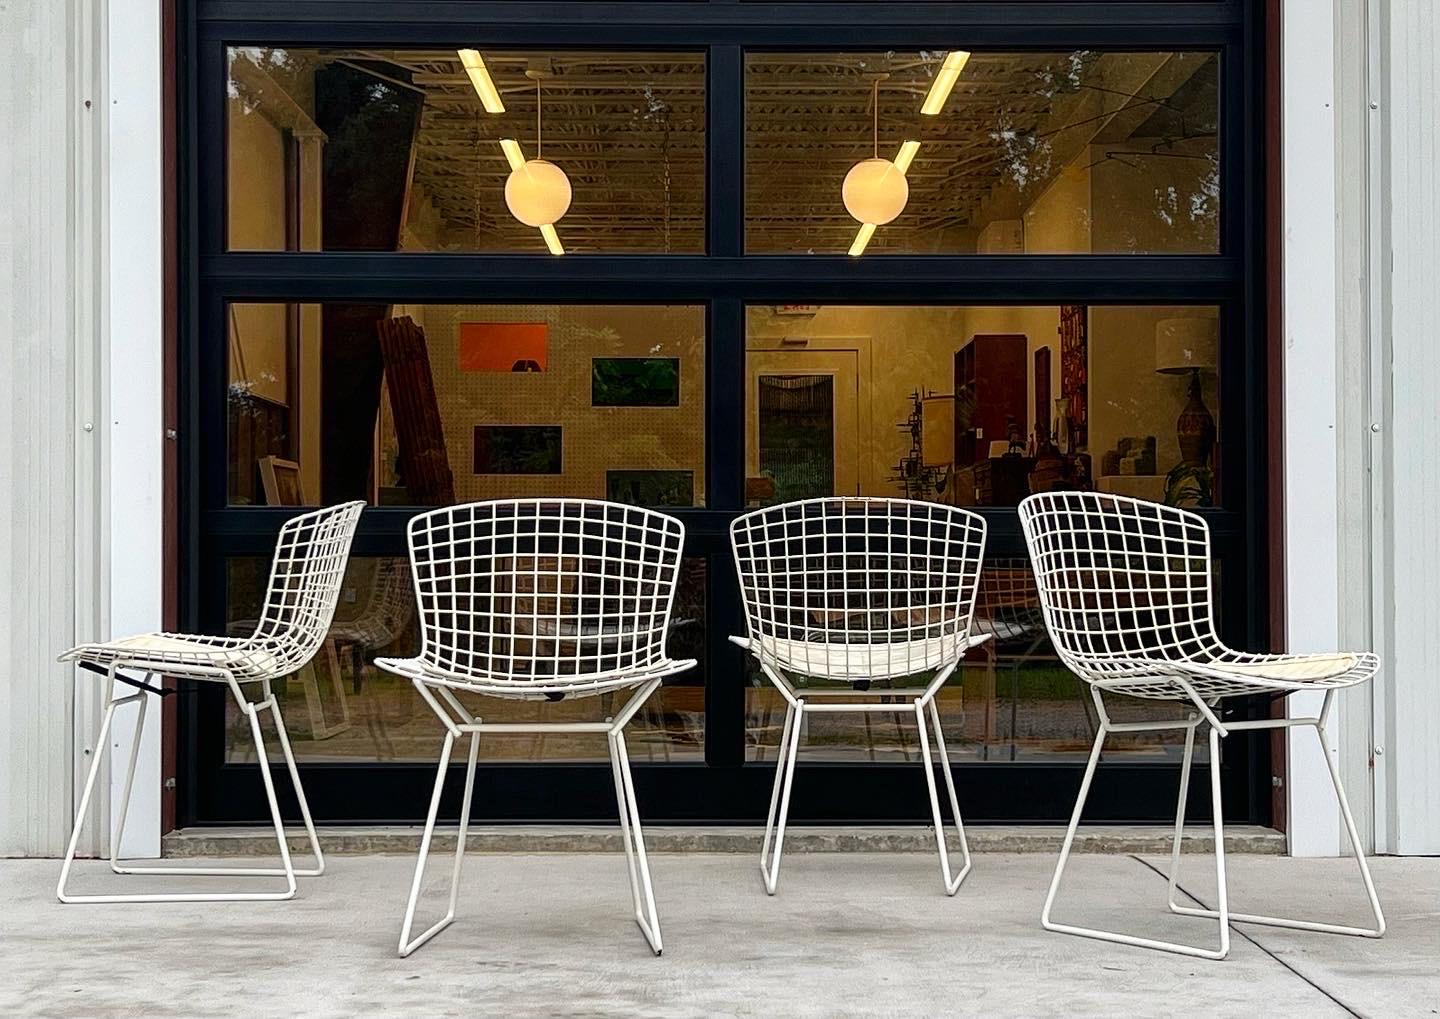 Mid-20th Century '4' Chairs by Harry Bertoia for Knoll Manufacturing, Circa 1960s